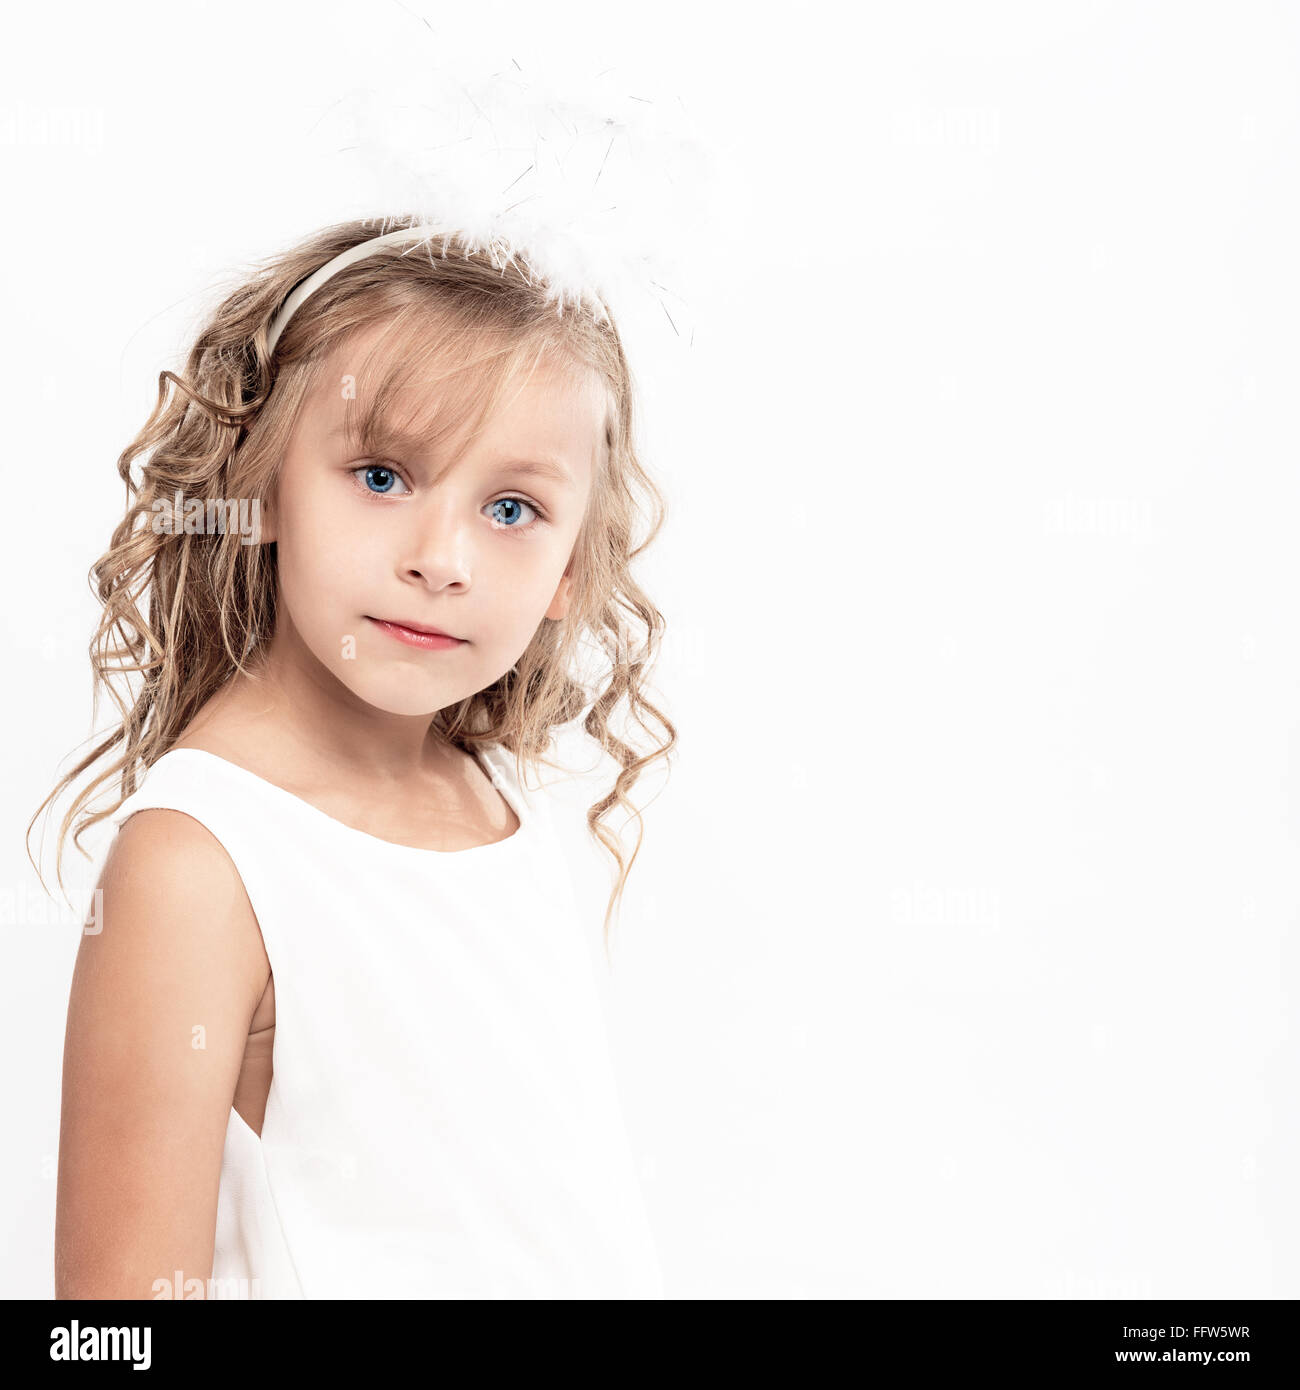 Angel. Portrait of a very beautiful young girl Stock Photo